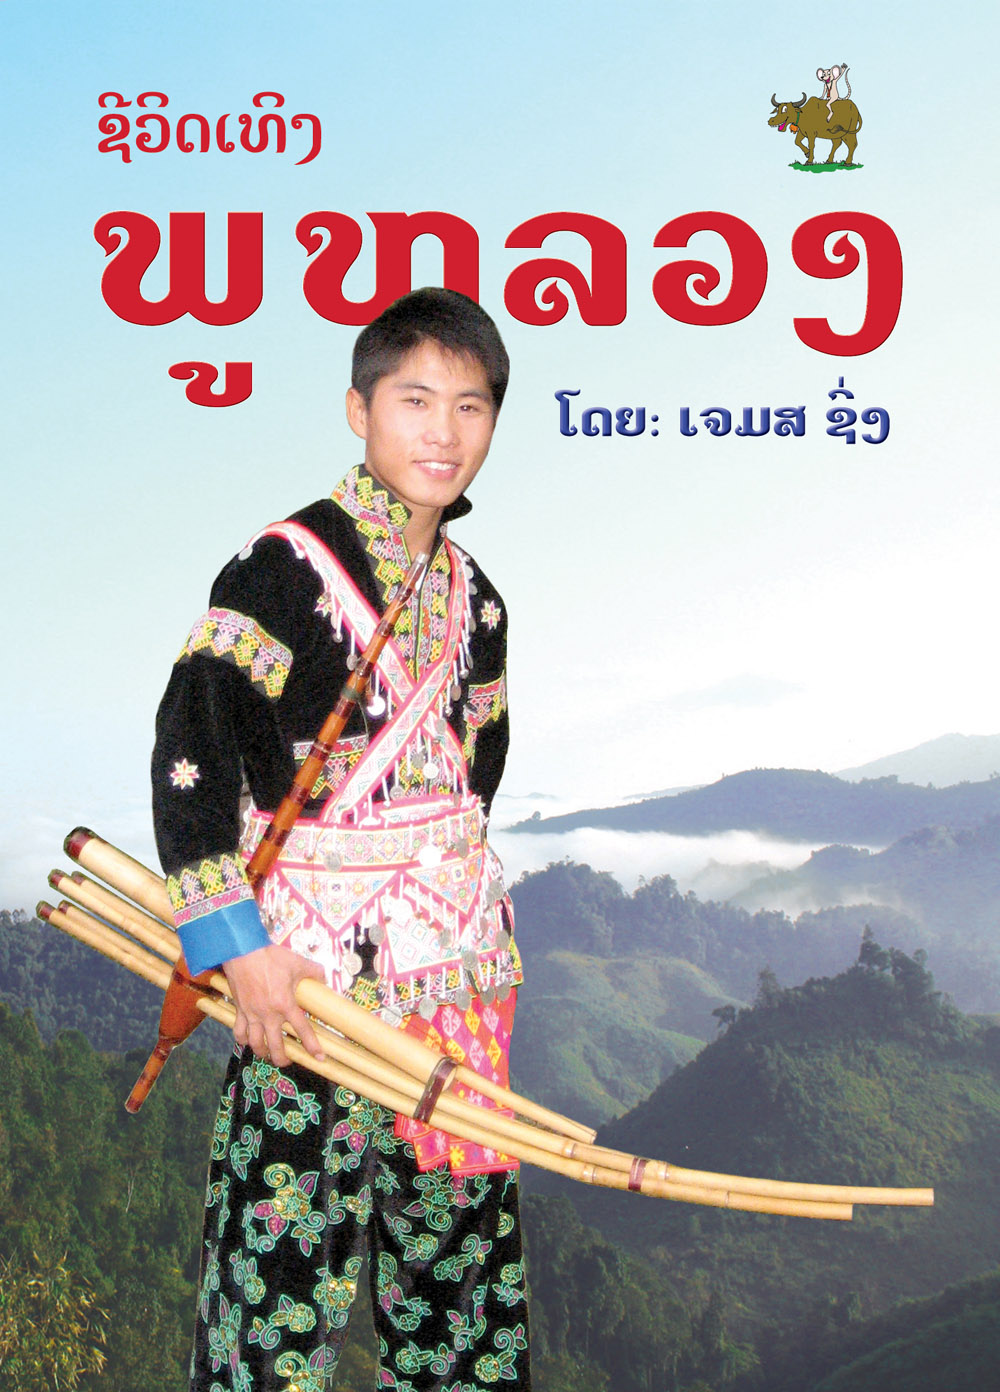 Growing Up on the Mountain large book cover, published in Lao language